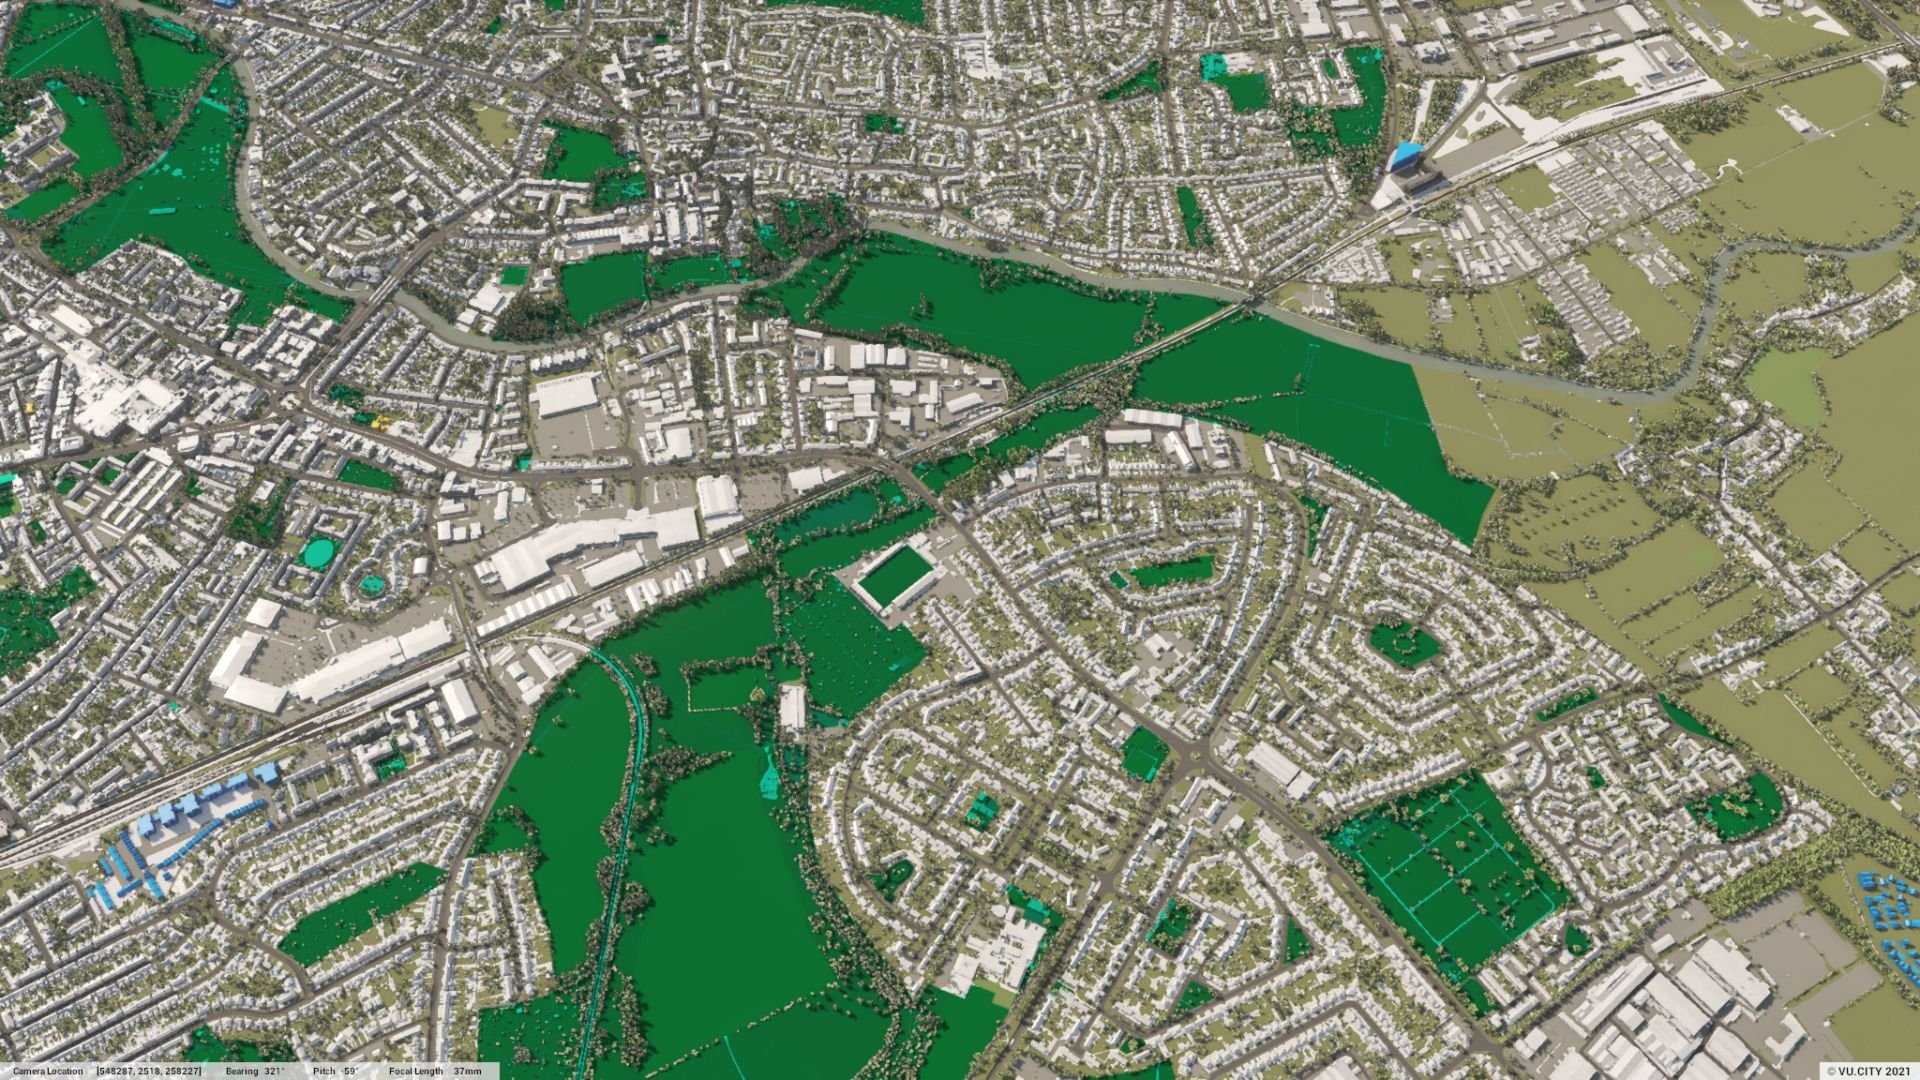 Protected Open Space Data from Cambridge City Council